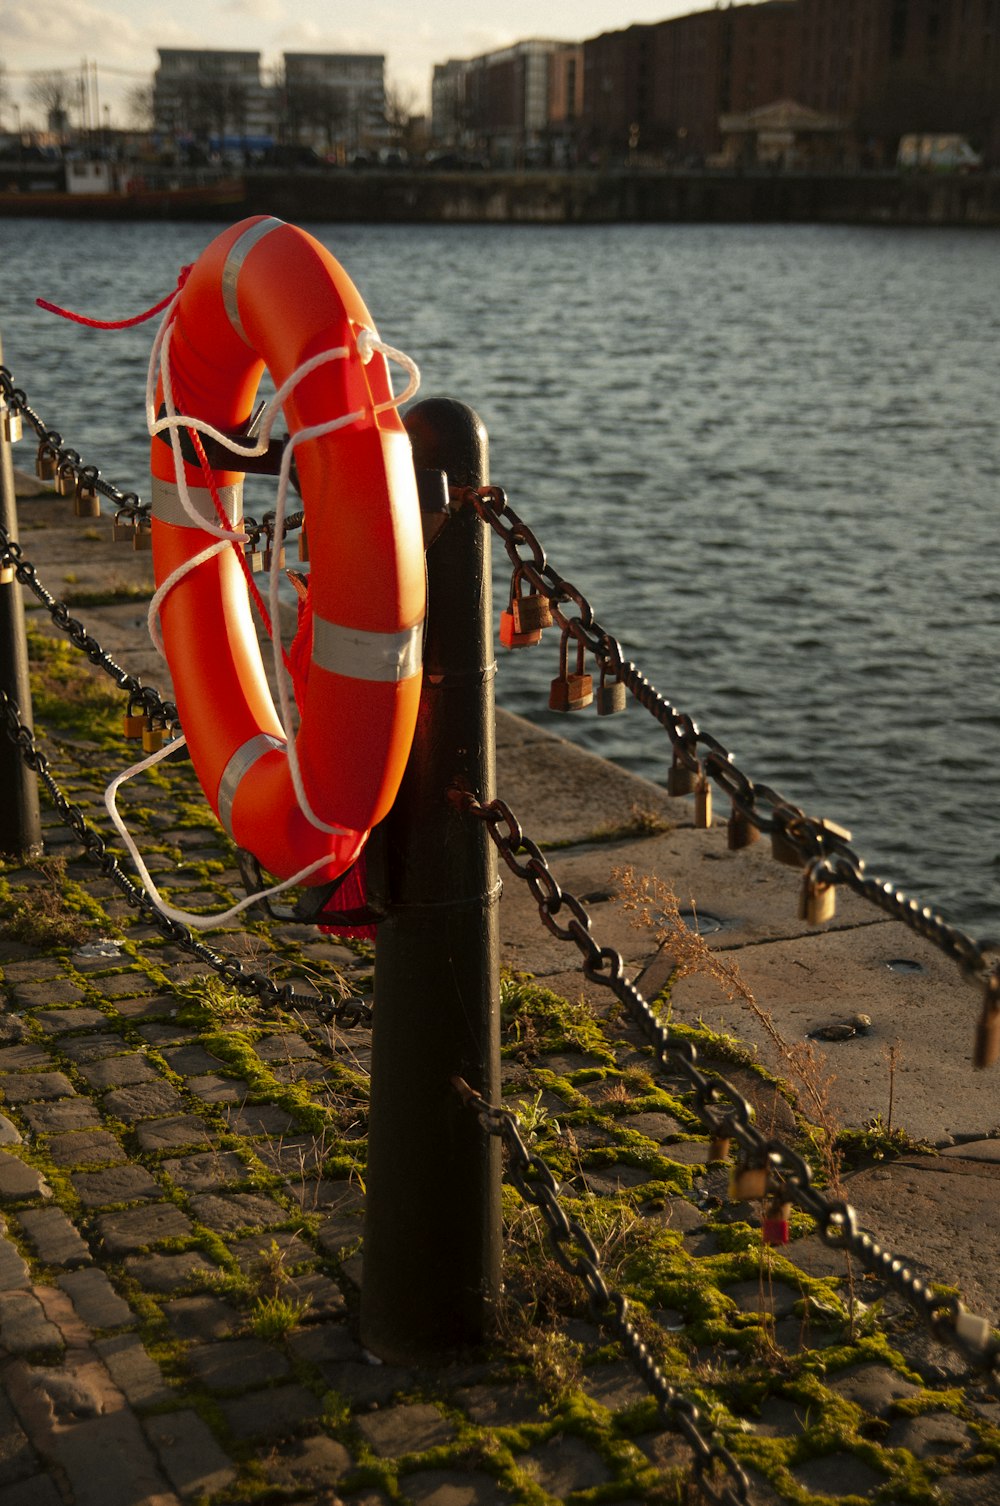 a life preserver on a chain next to a body of water